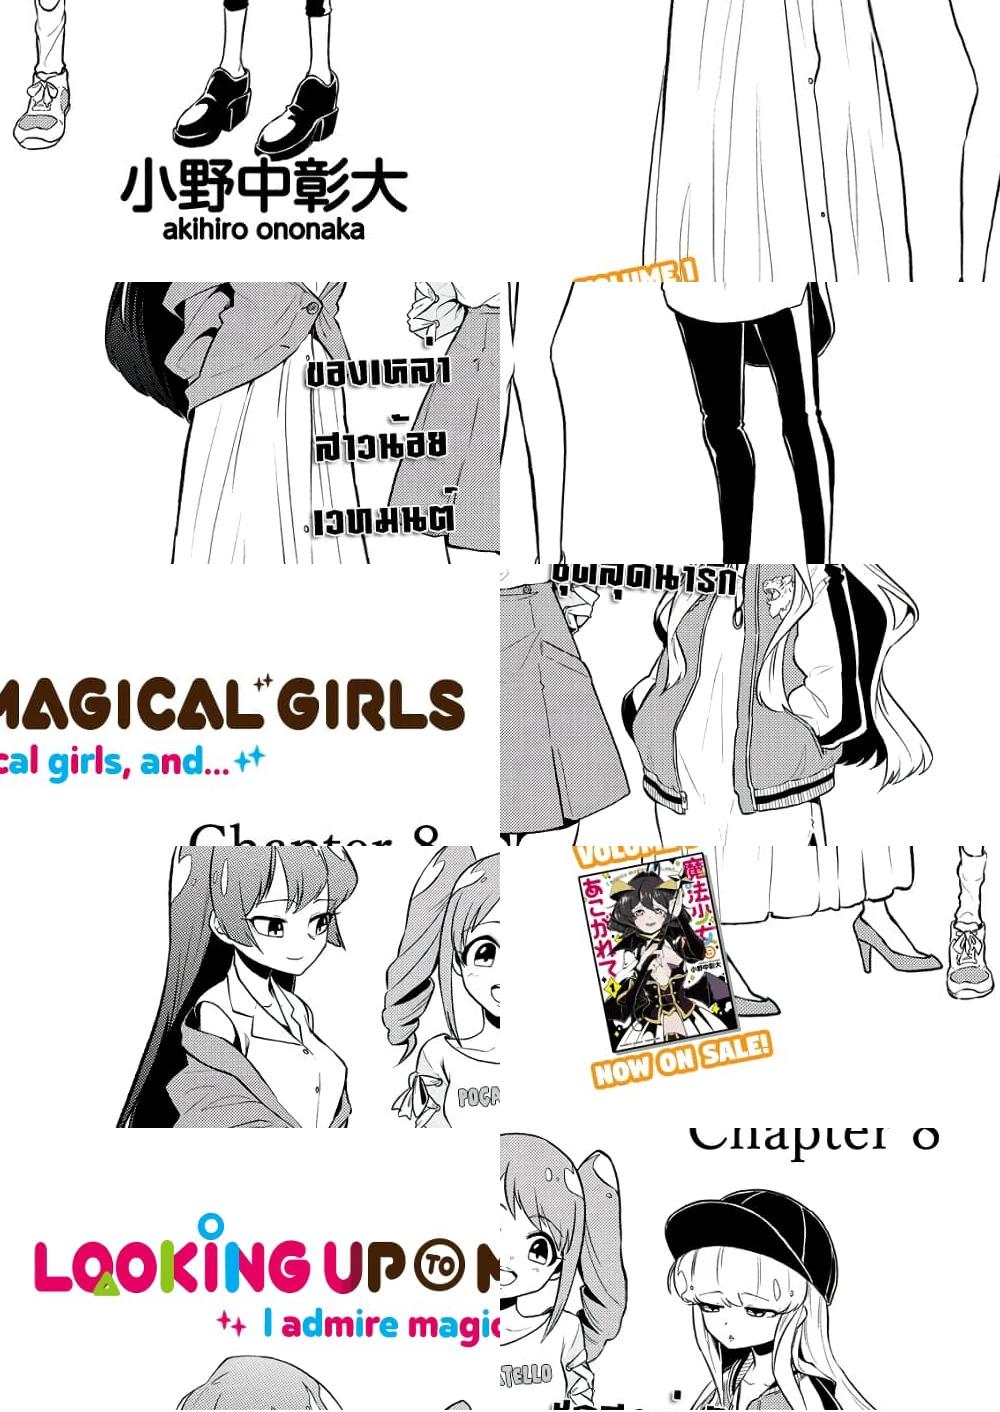 Looking up to Magical Girls - 8 - 2